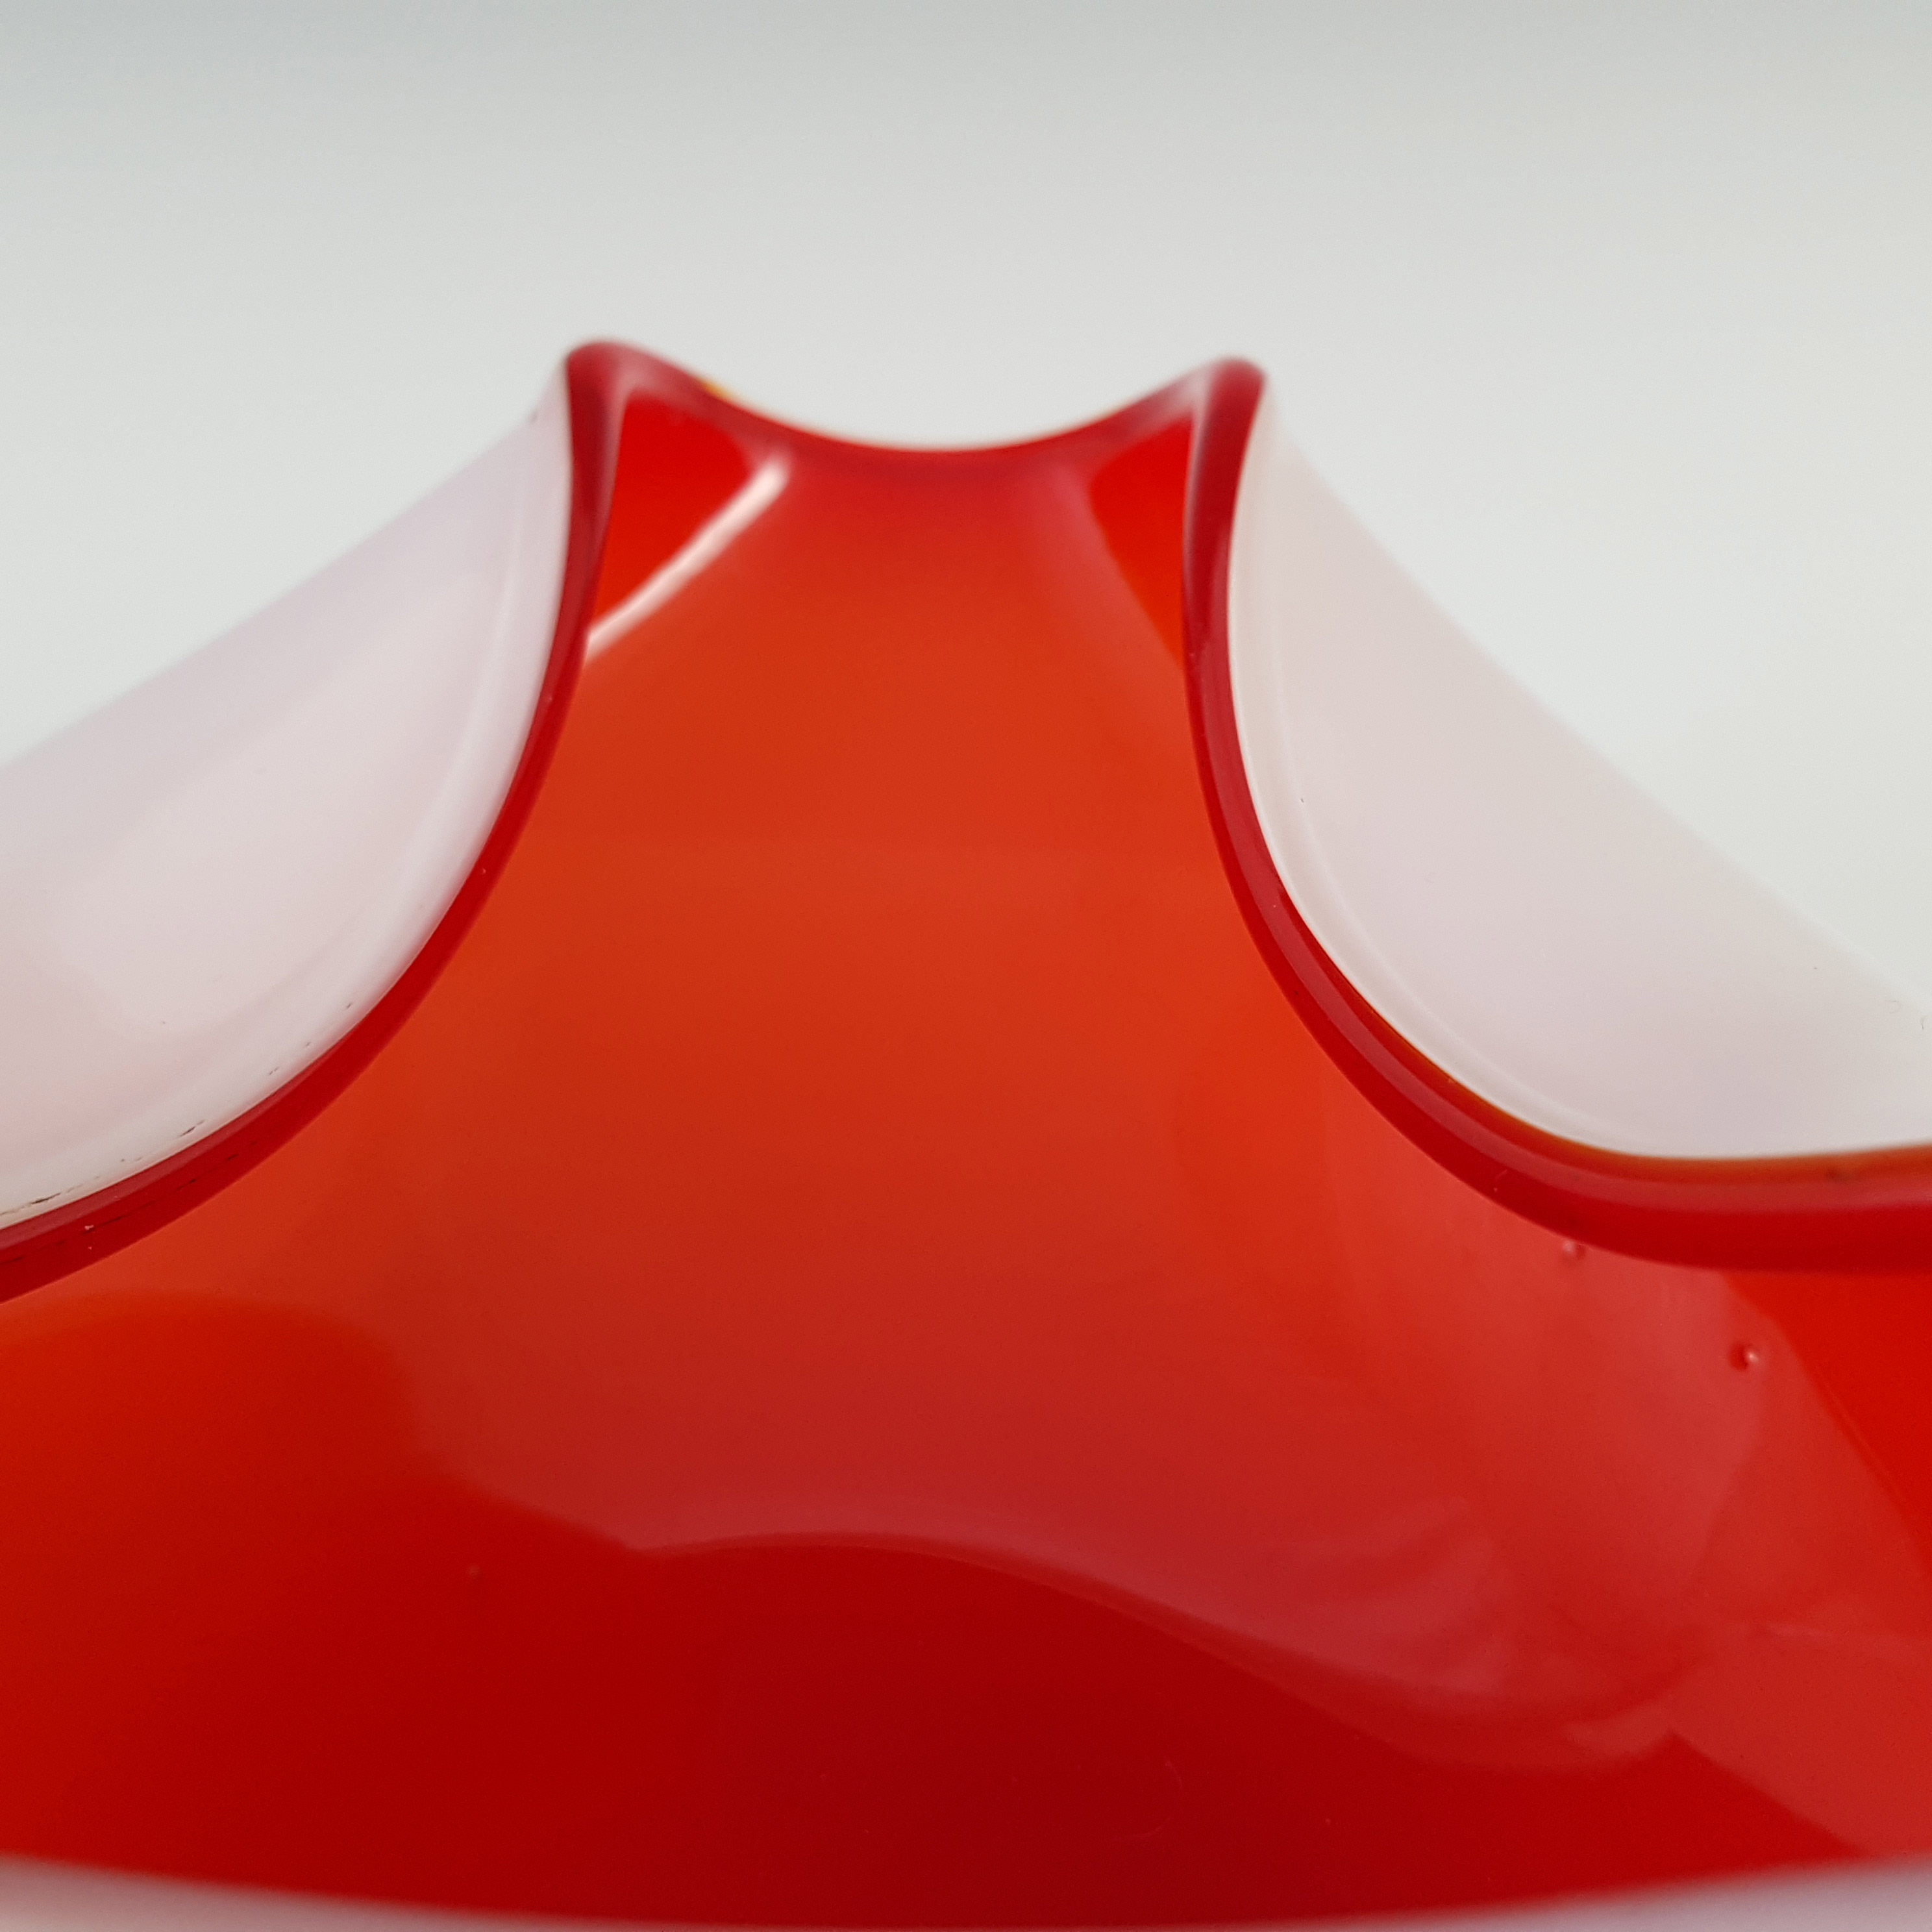 Japanese Red & White Cased Glass 'Wales' Biomorphic Bowl - Click Image to Close